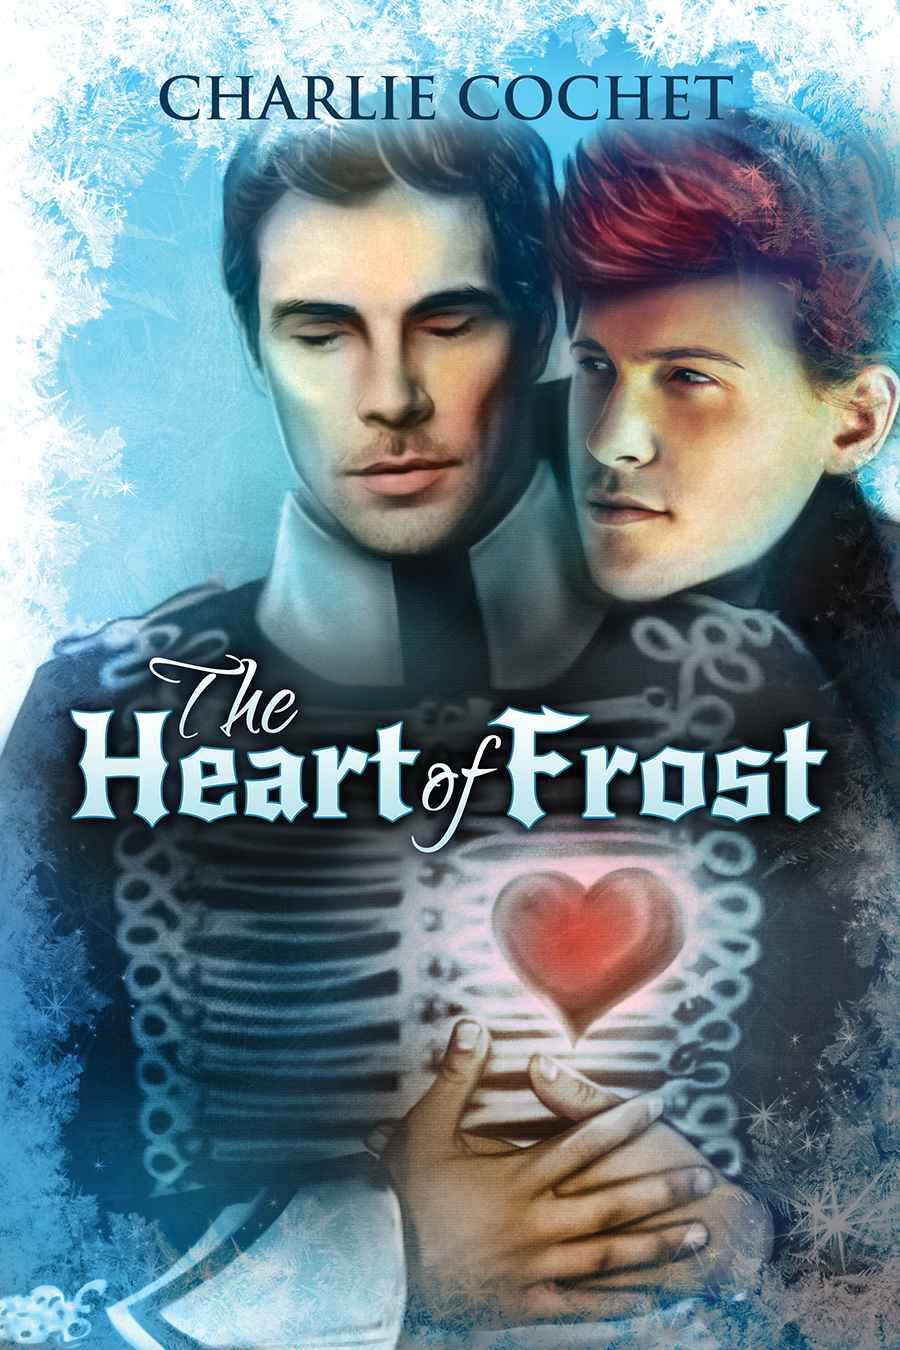 North Pole City Tales 02 - The Heart of Frost by Charlie Cochet